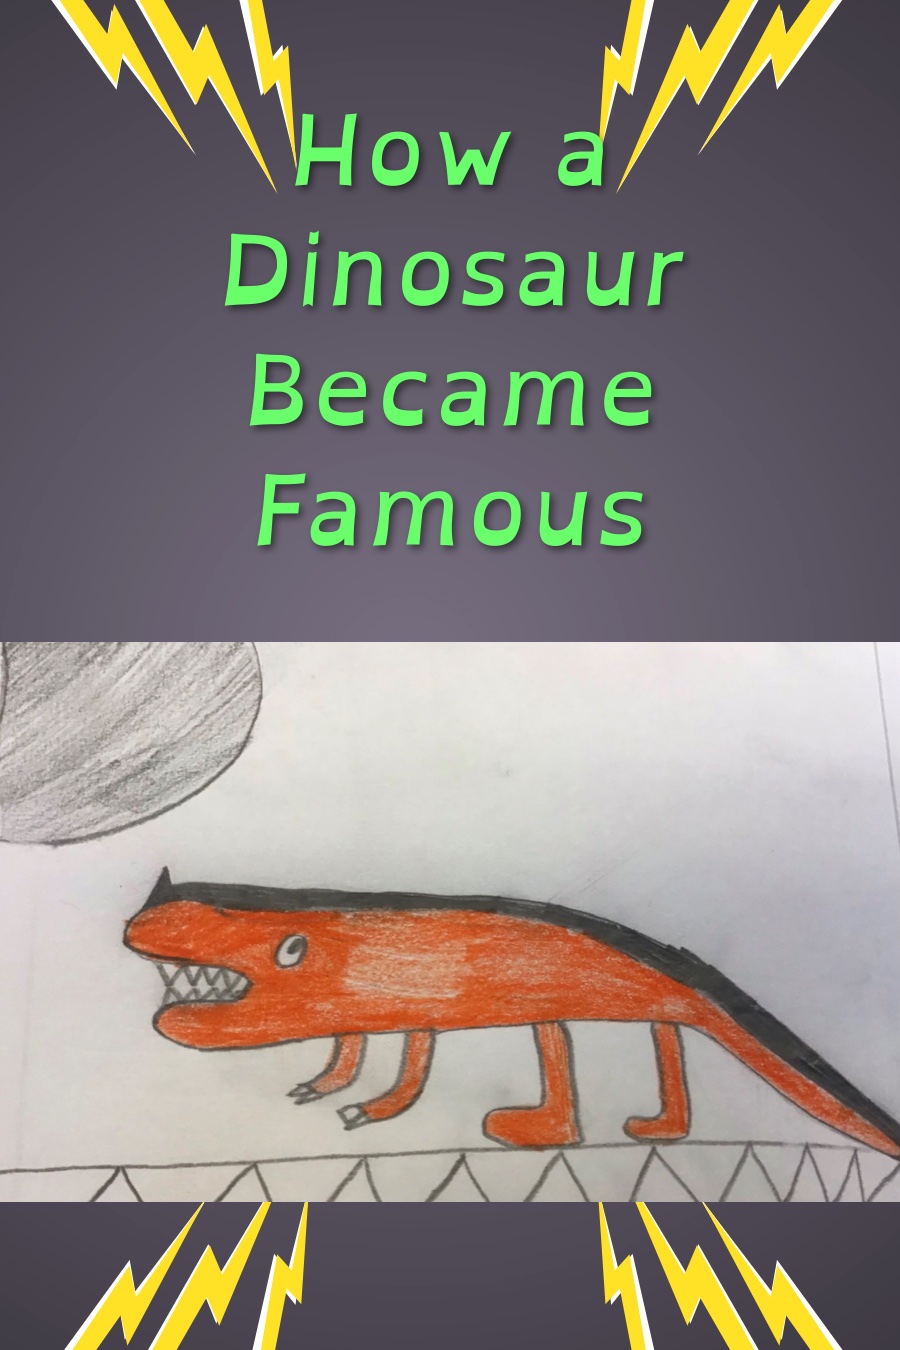 How a Dinosaur Became Famous by Grayson E